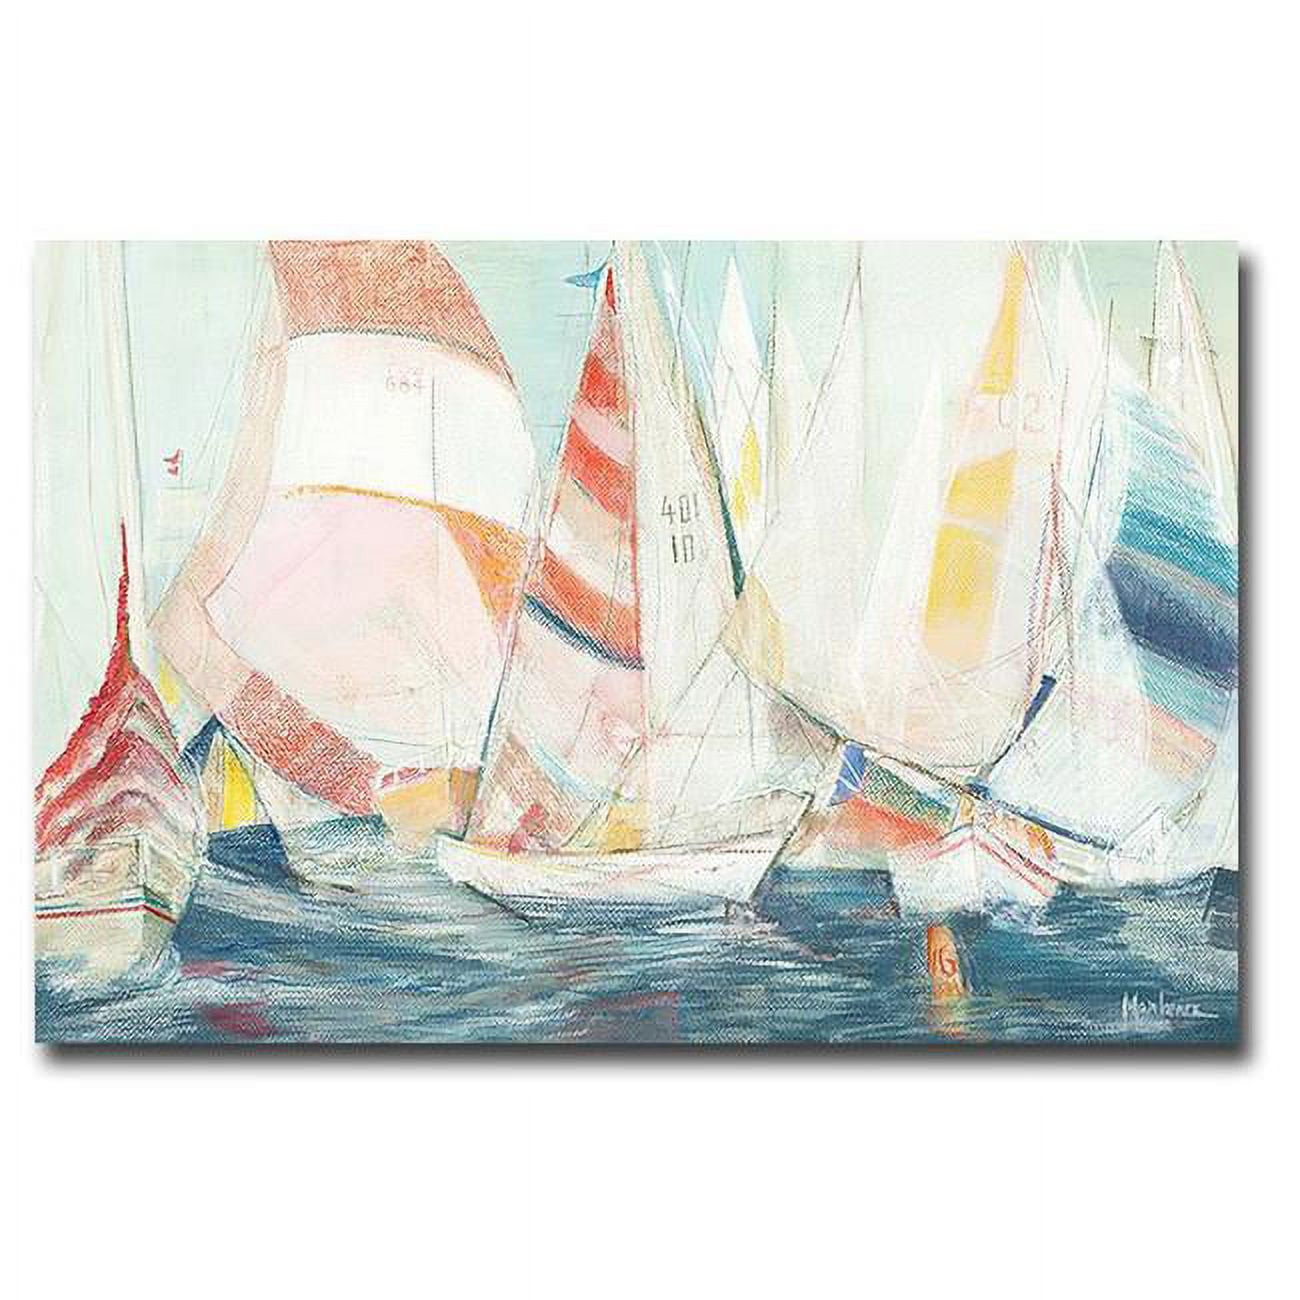 2436t238ig Rounding The Mark By Marlene Lawrence Premium Gallery-wrapped Canvas Giclee Art - Ready-to-hang, 24 X 36 X 1.5 In.